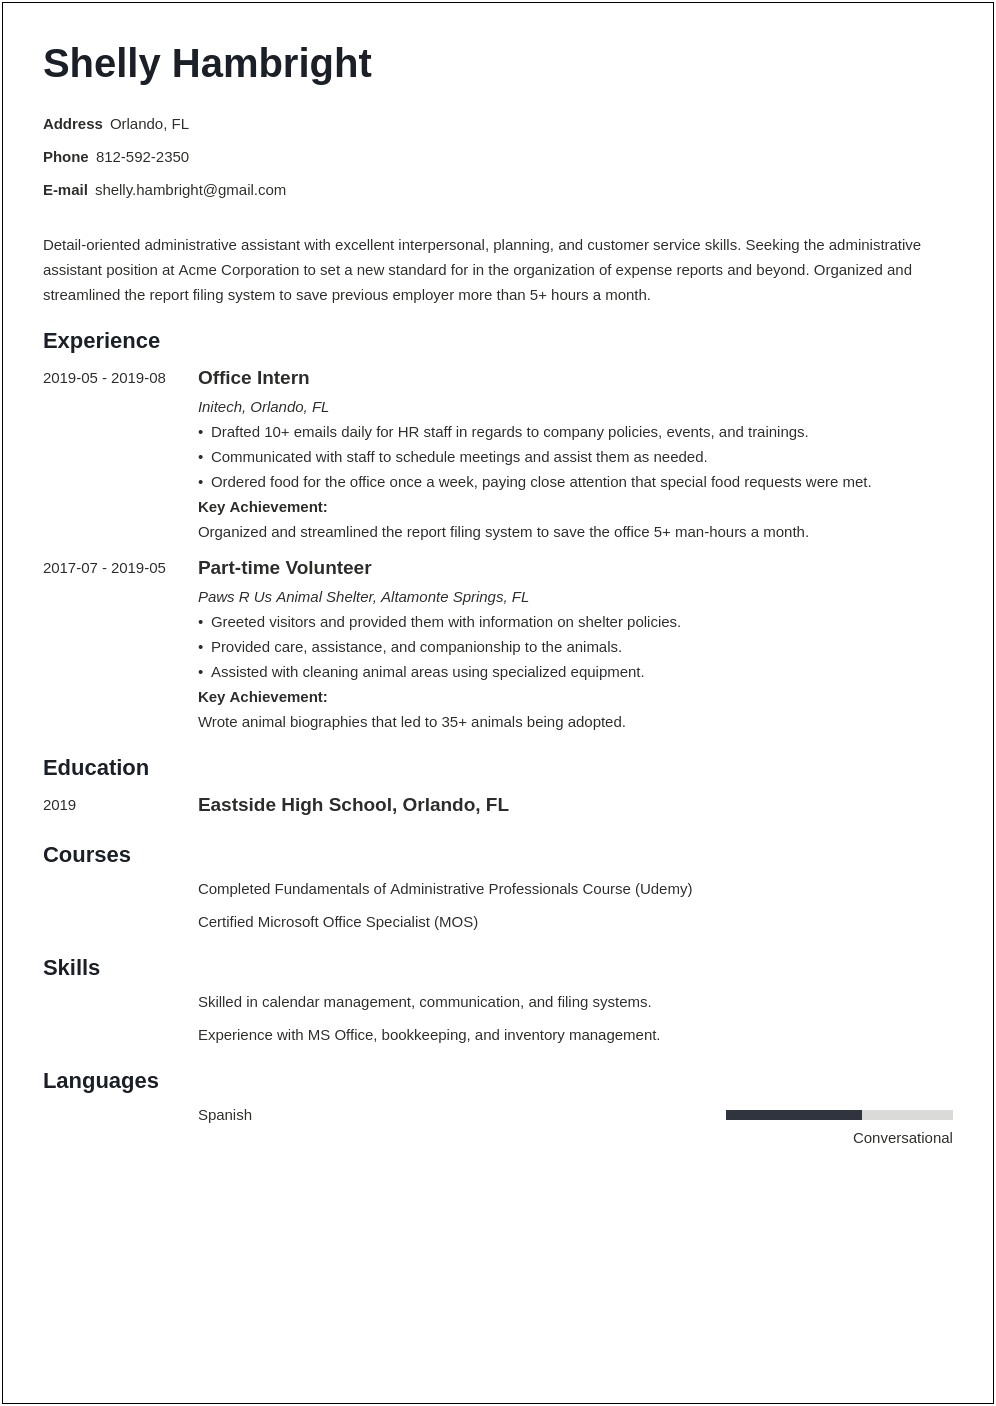 Skills Section Of Resume For Administrative Assistant